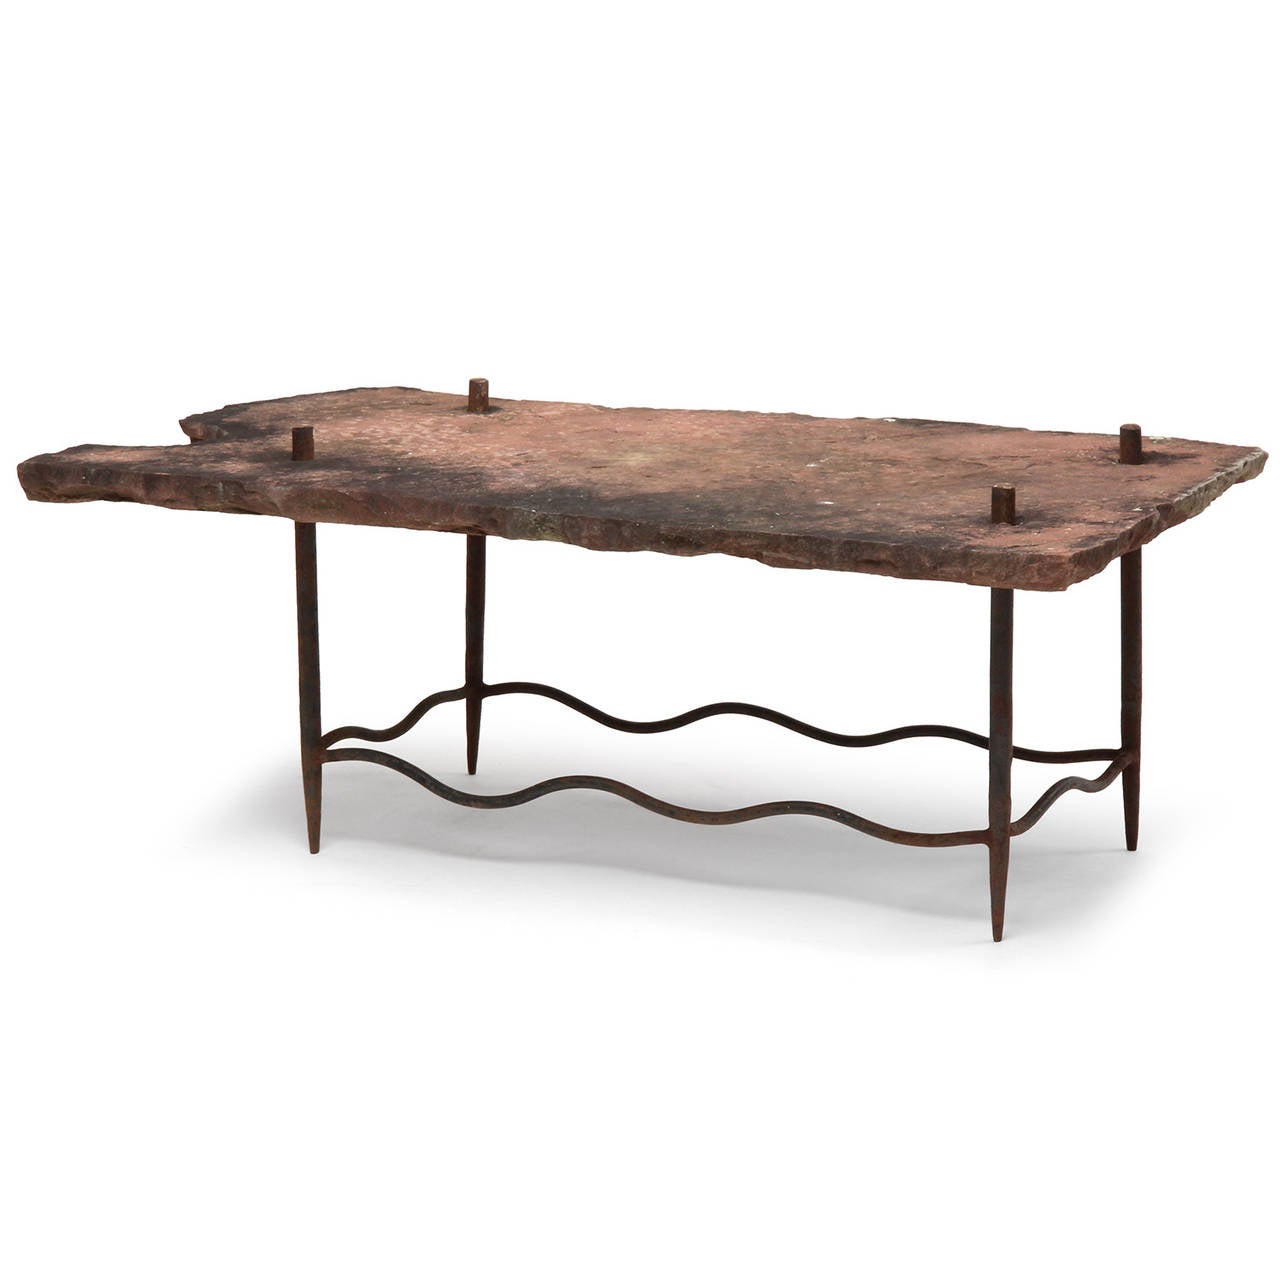 American Craftsman Artist Made Stone Topped Table For Sale